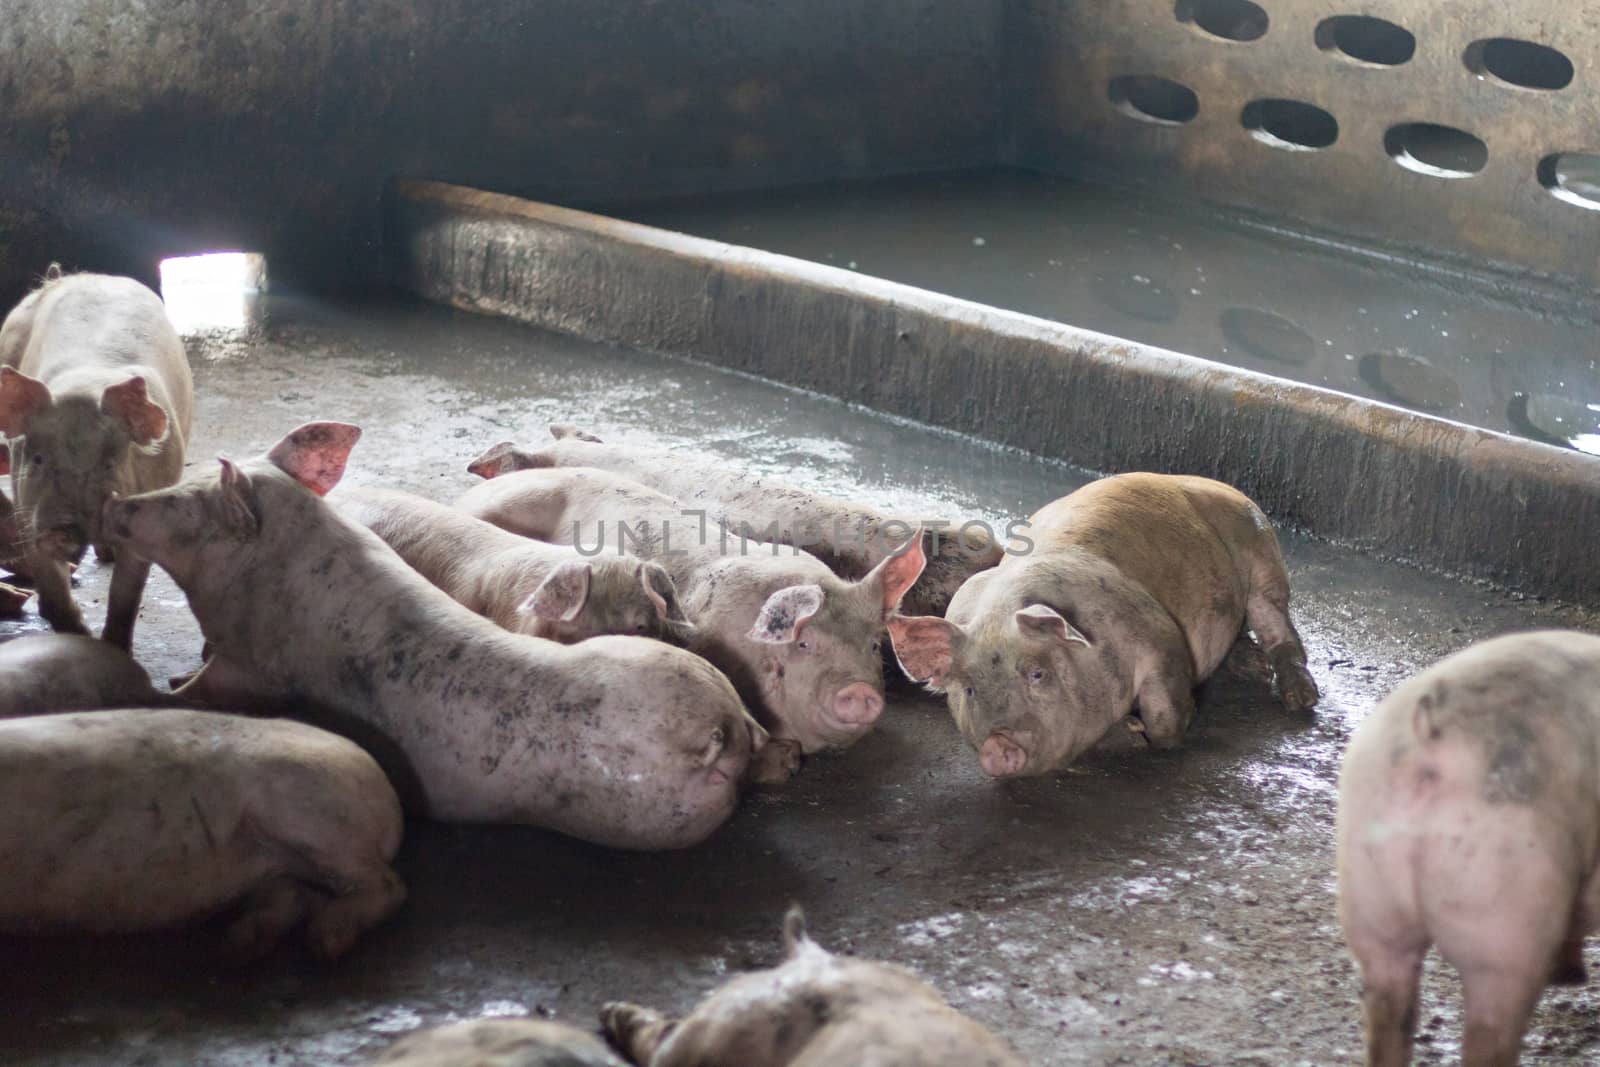 Pigs are sleeping after eating. They are fat. Pig in a pig farm